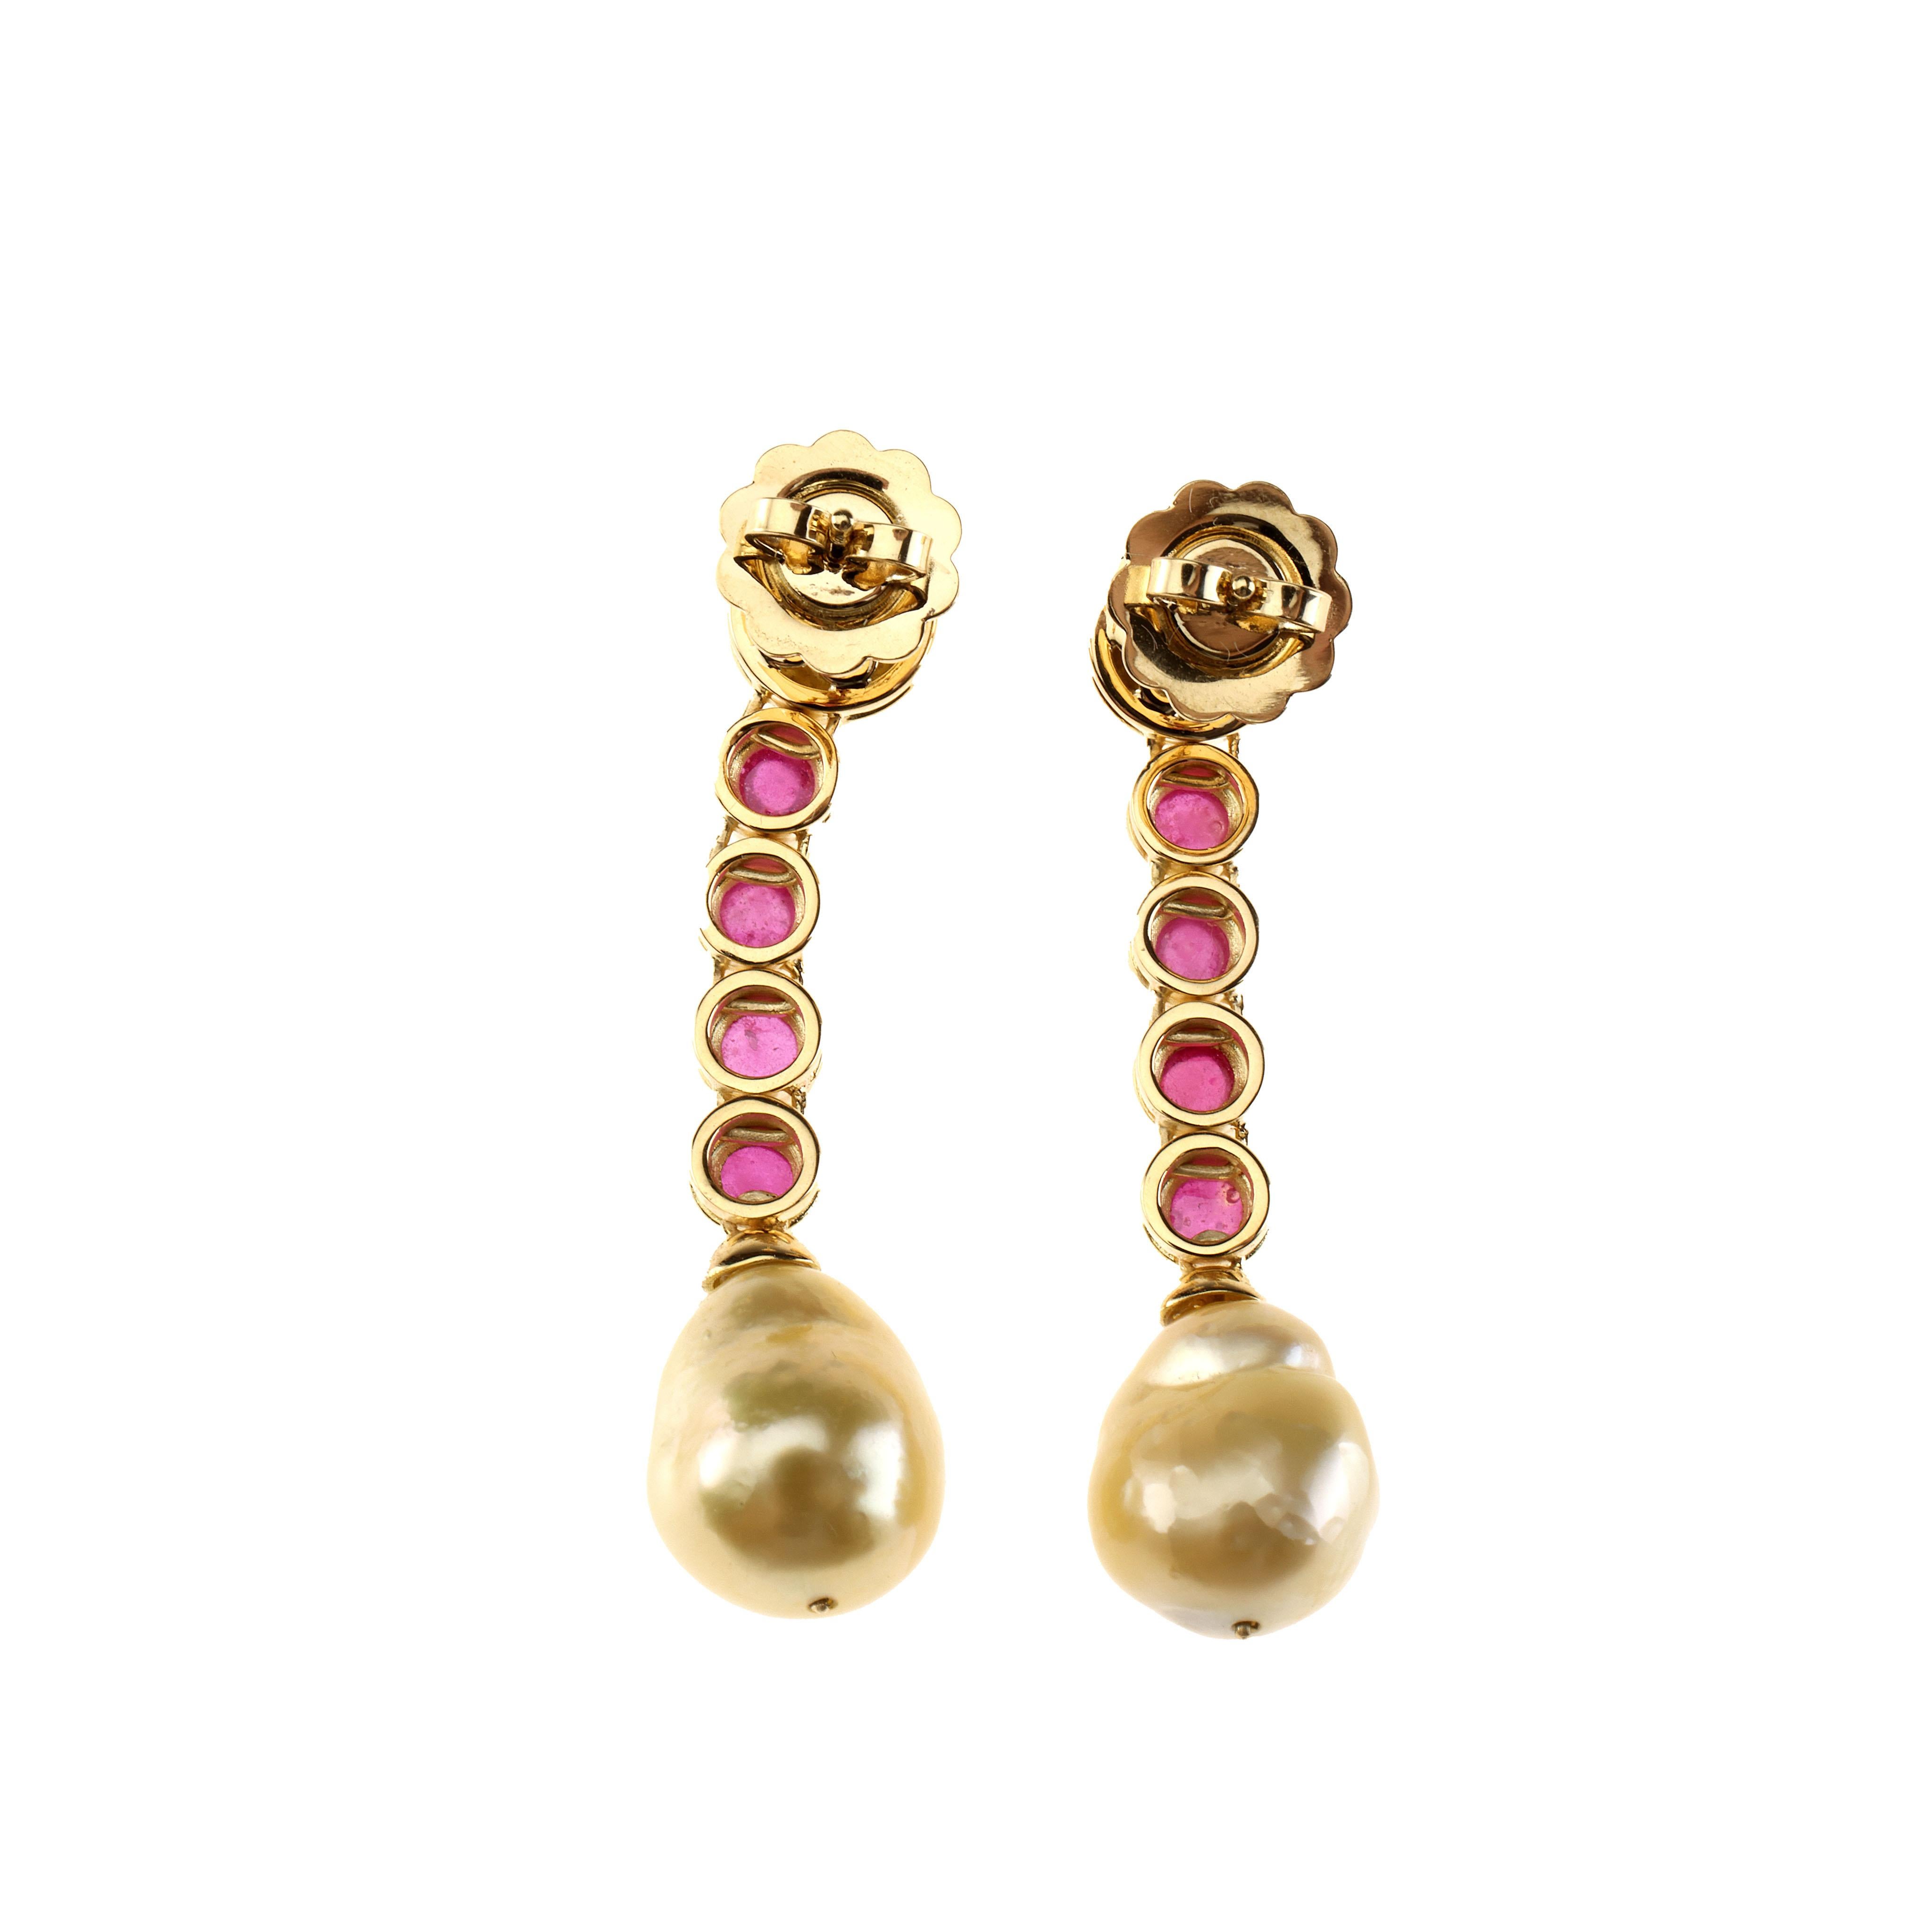 Cabochon Ruby 18k Gold gr 12,20 Natural Gold pearls earrings.
All Giulia Colussi jewelry is new and has never been previously owned or worn. Each item will arrive at your door beautifully gift wrapped in our boxes, put inside an elegant pouch or